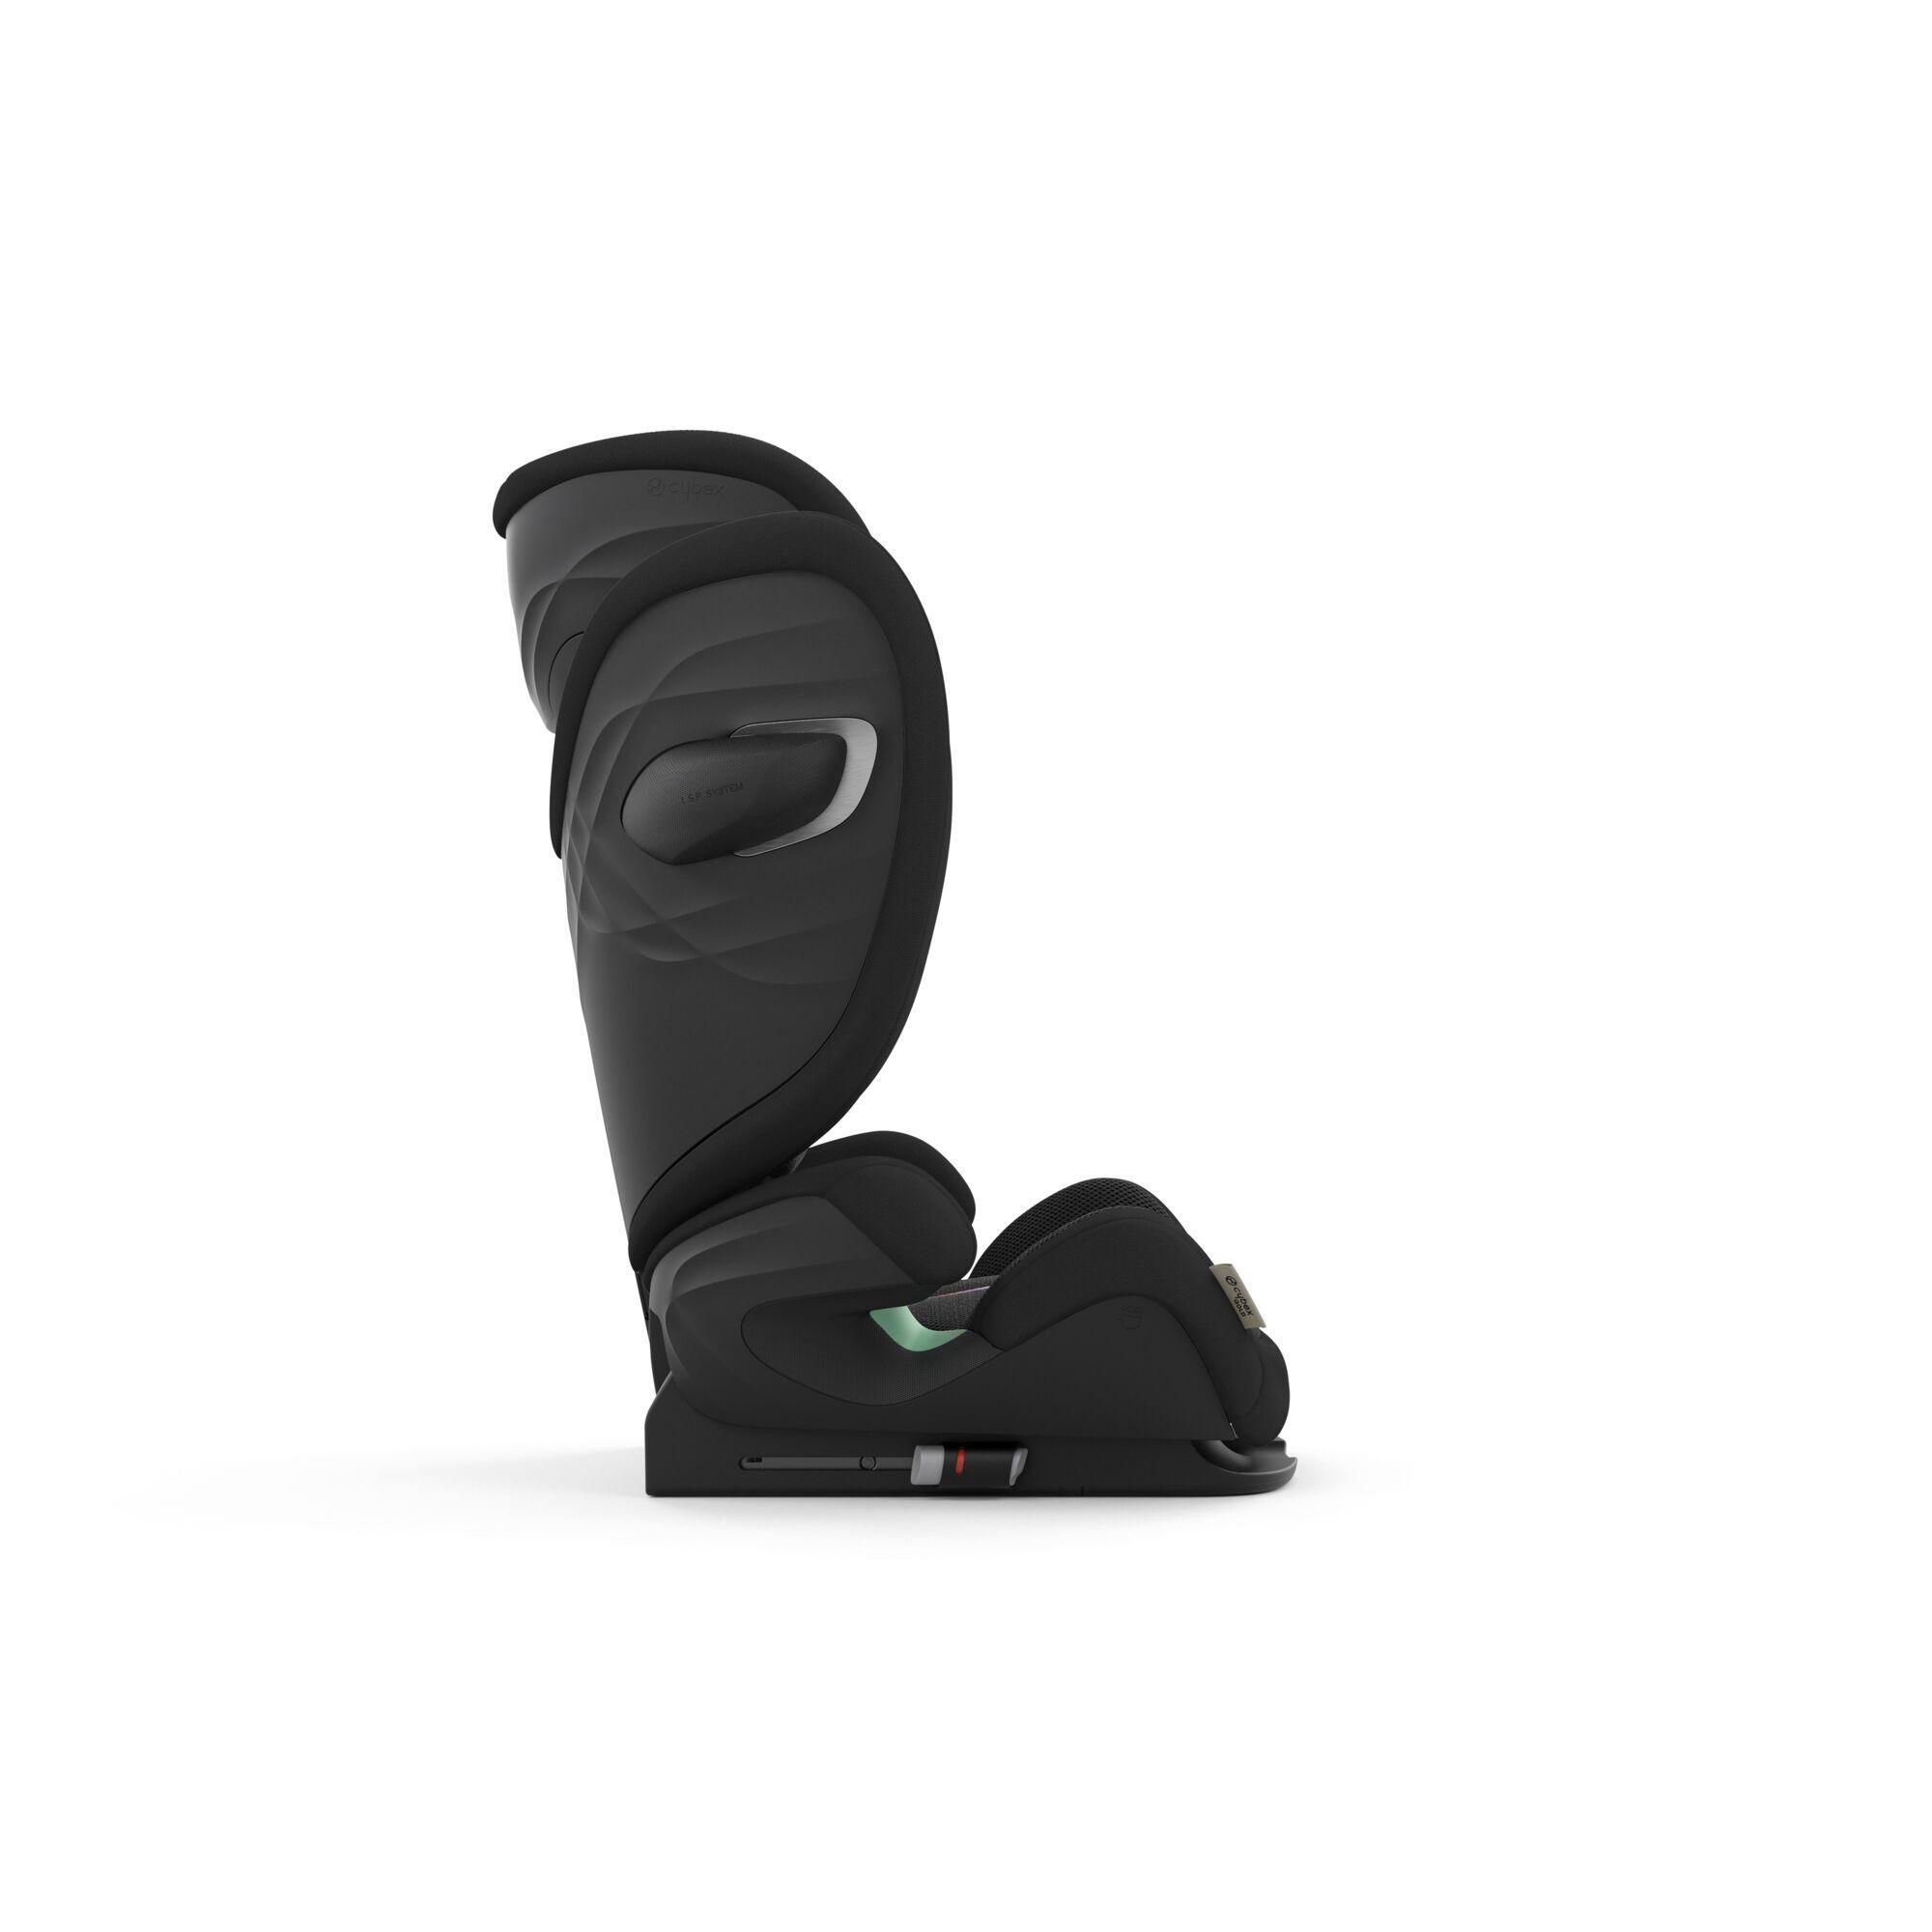 Cybex Solution T i-Fix High-back Booster Car Seat in Moon Black